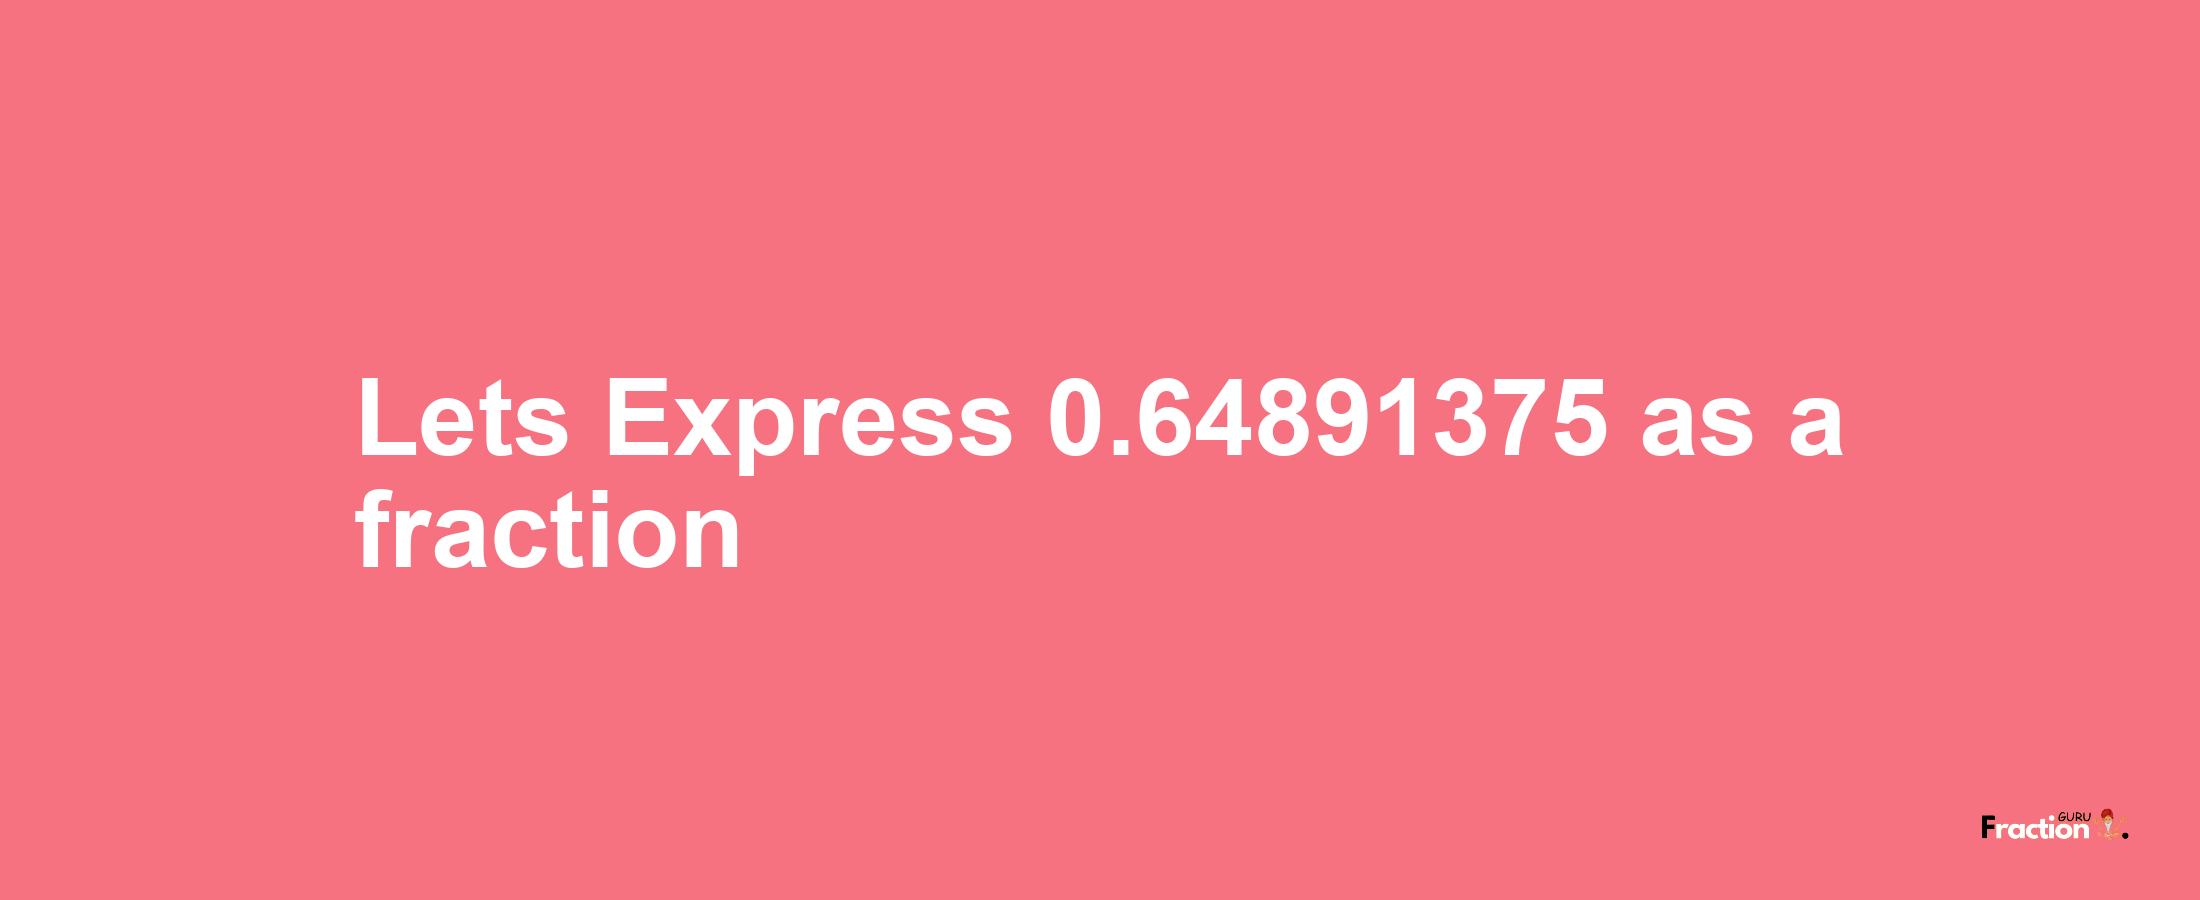 Lets Express 0.64891375 as afraction